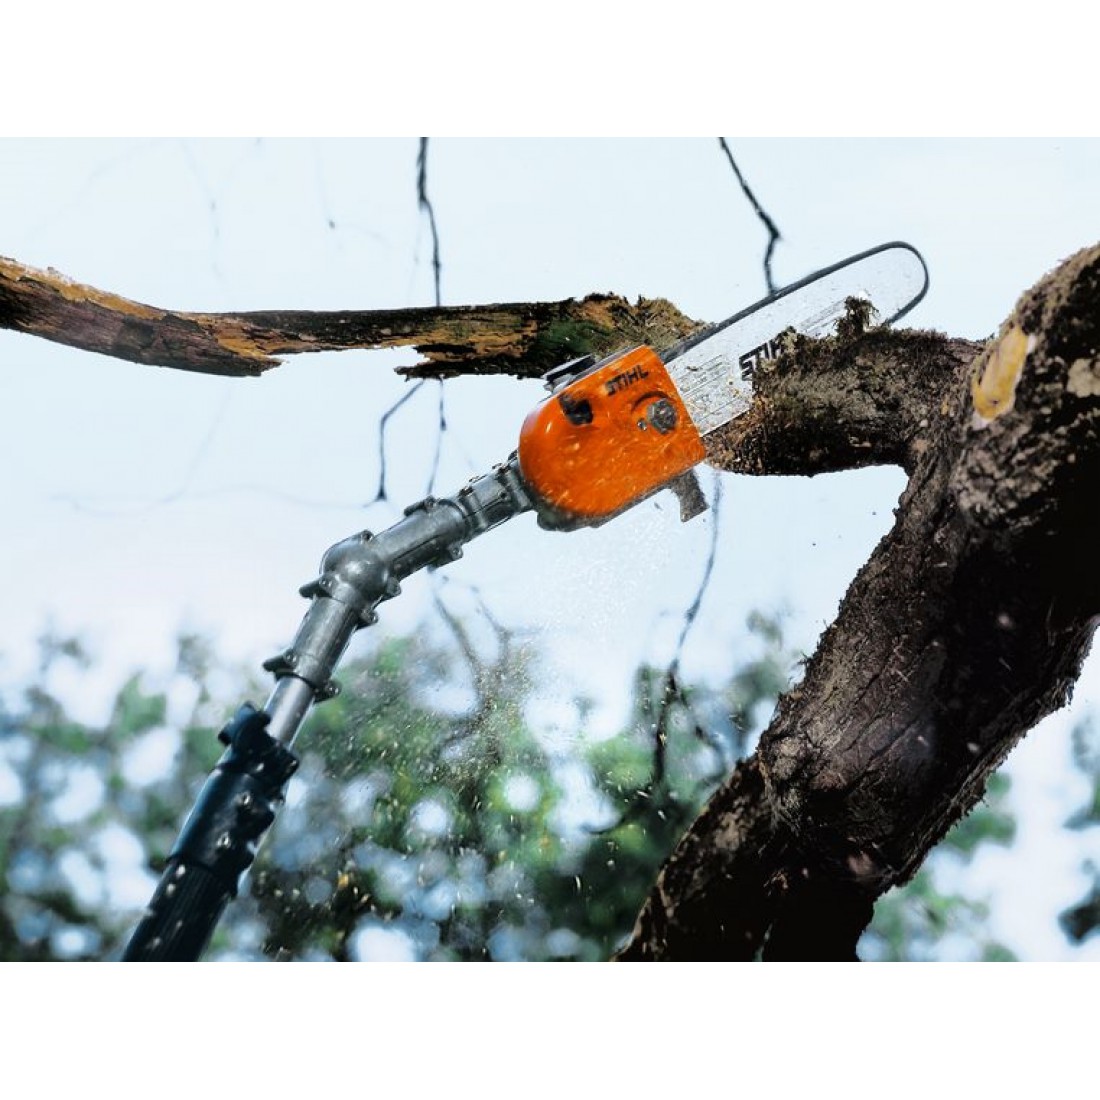 Ht 133 - powerful top-model for professional tree maintenance